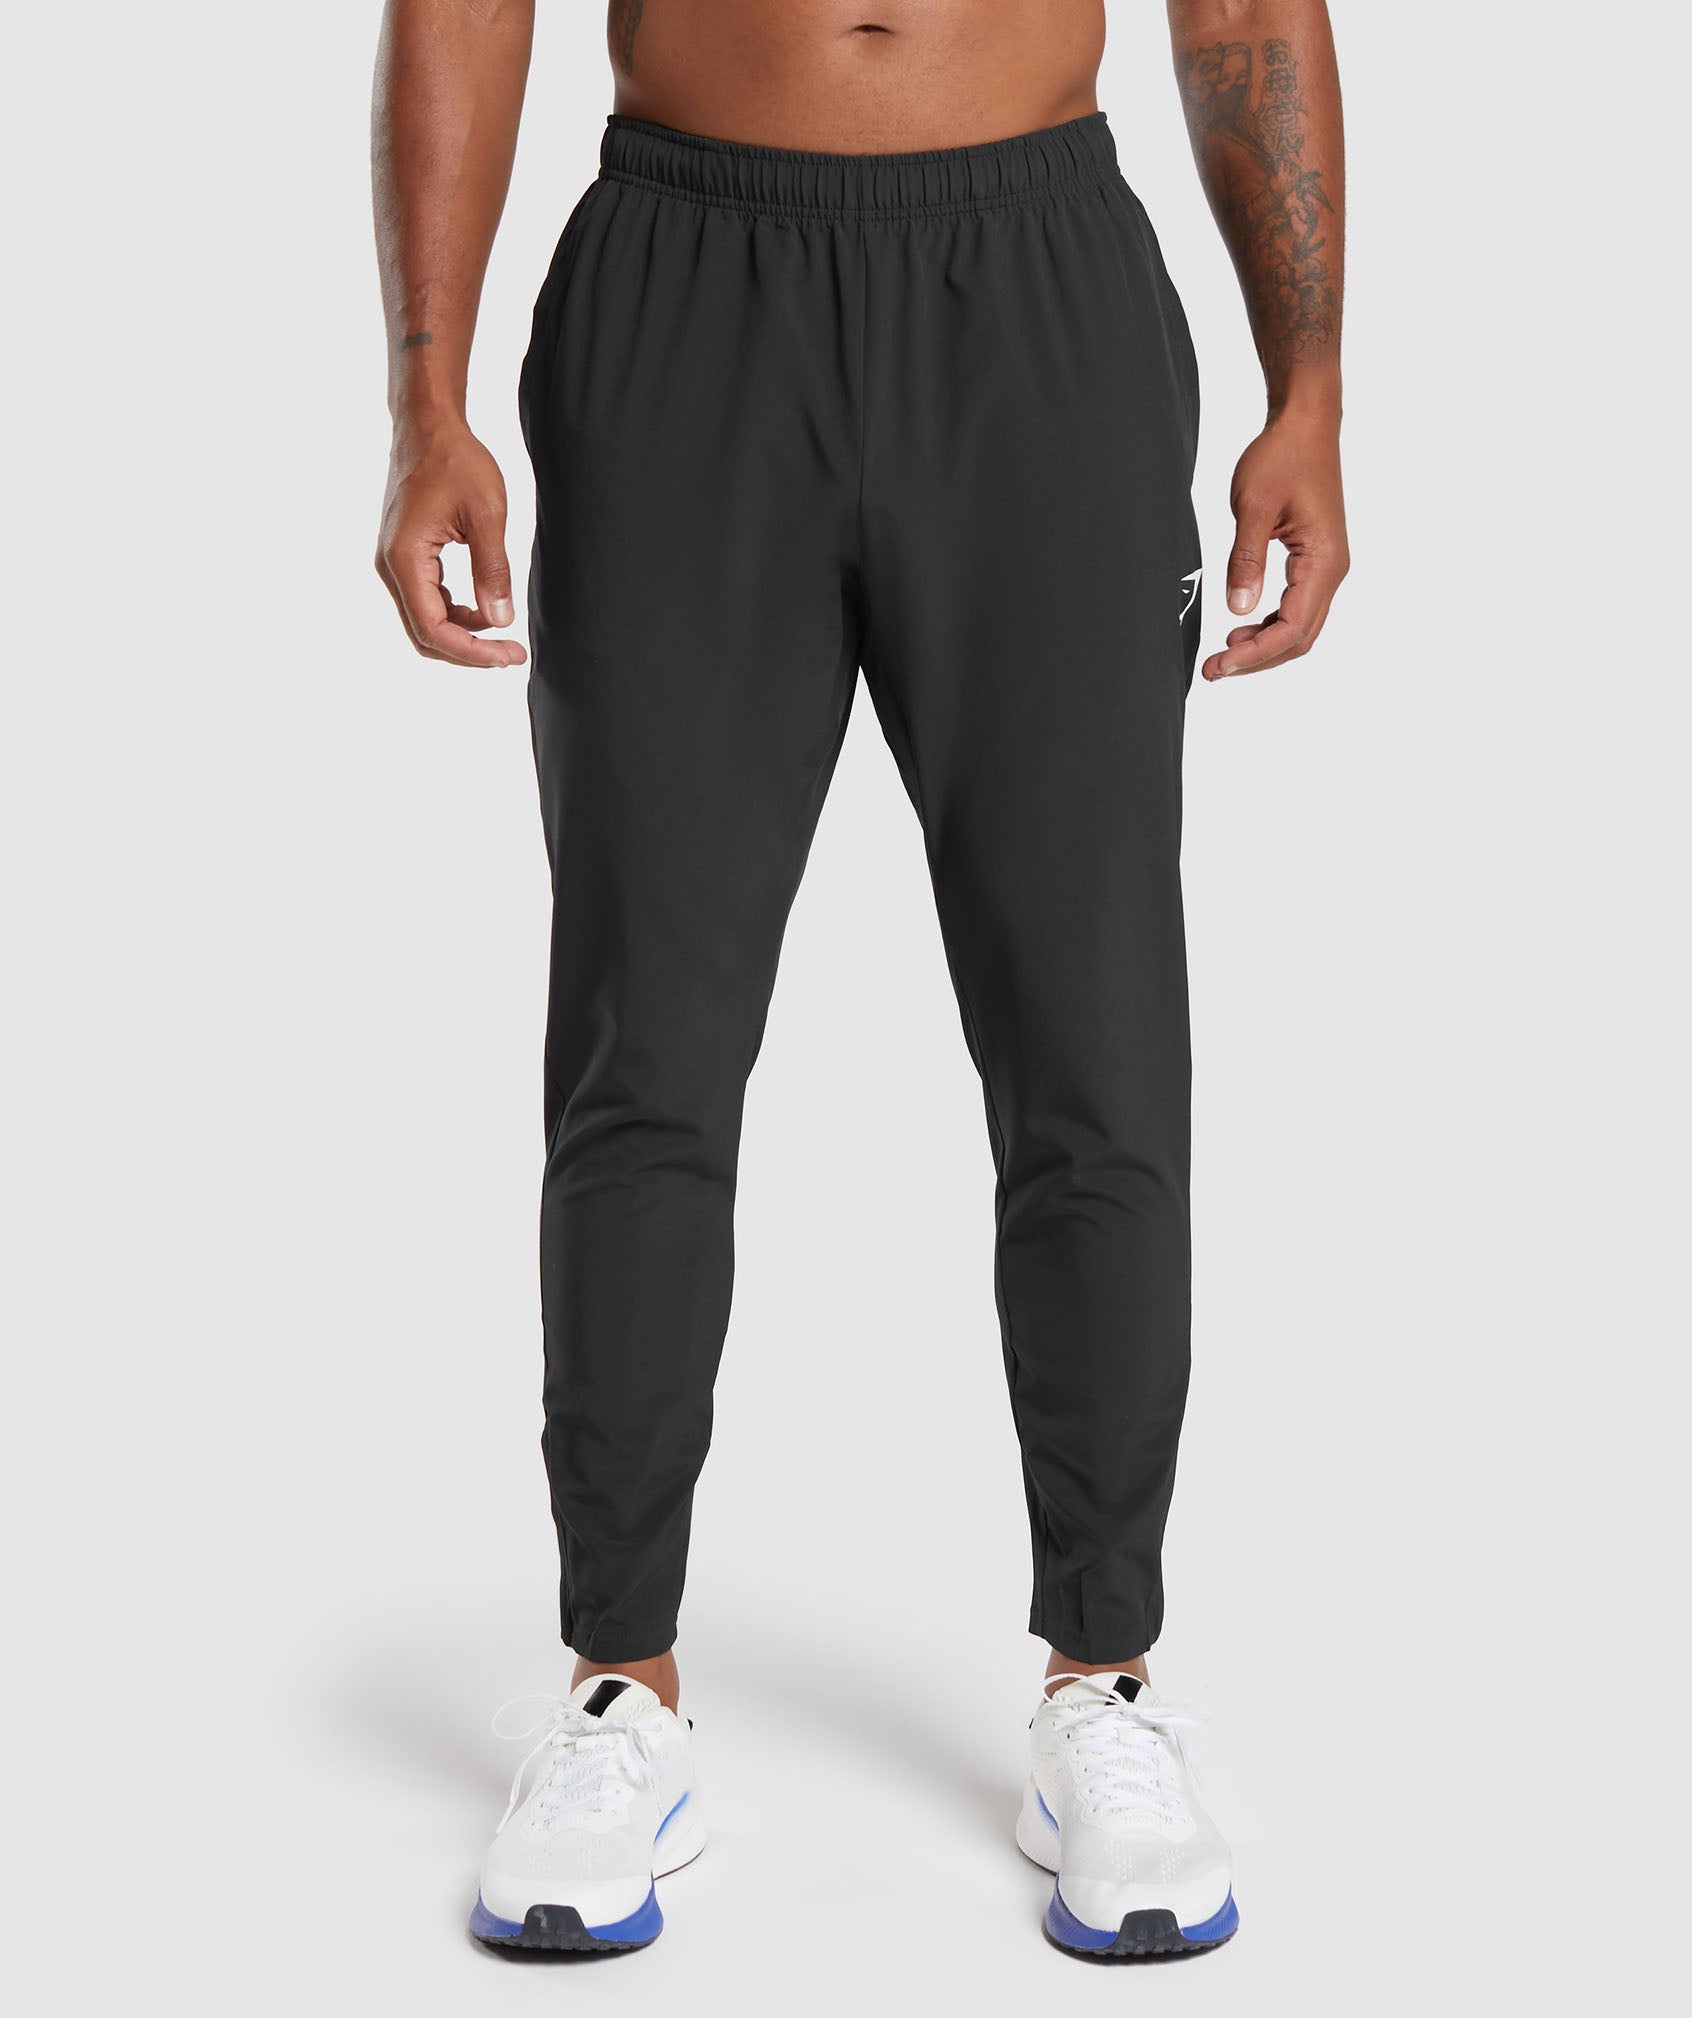 Arrival Woven Joggers in Black